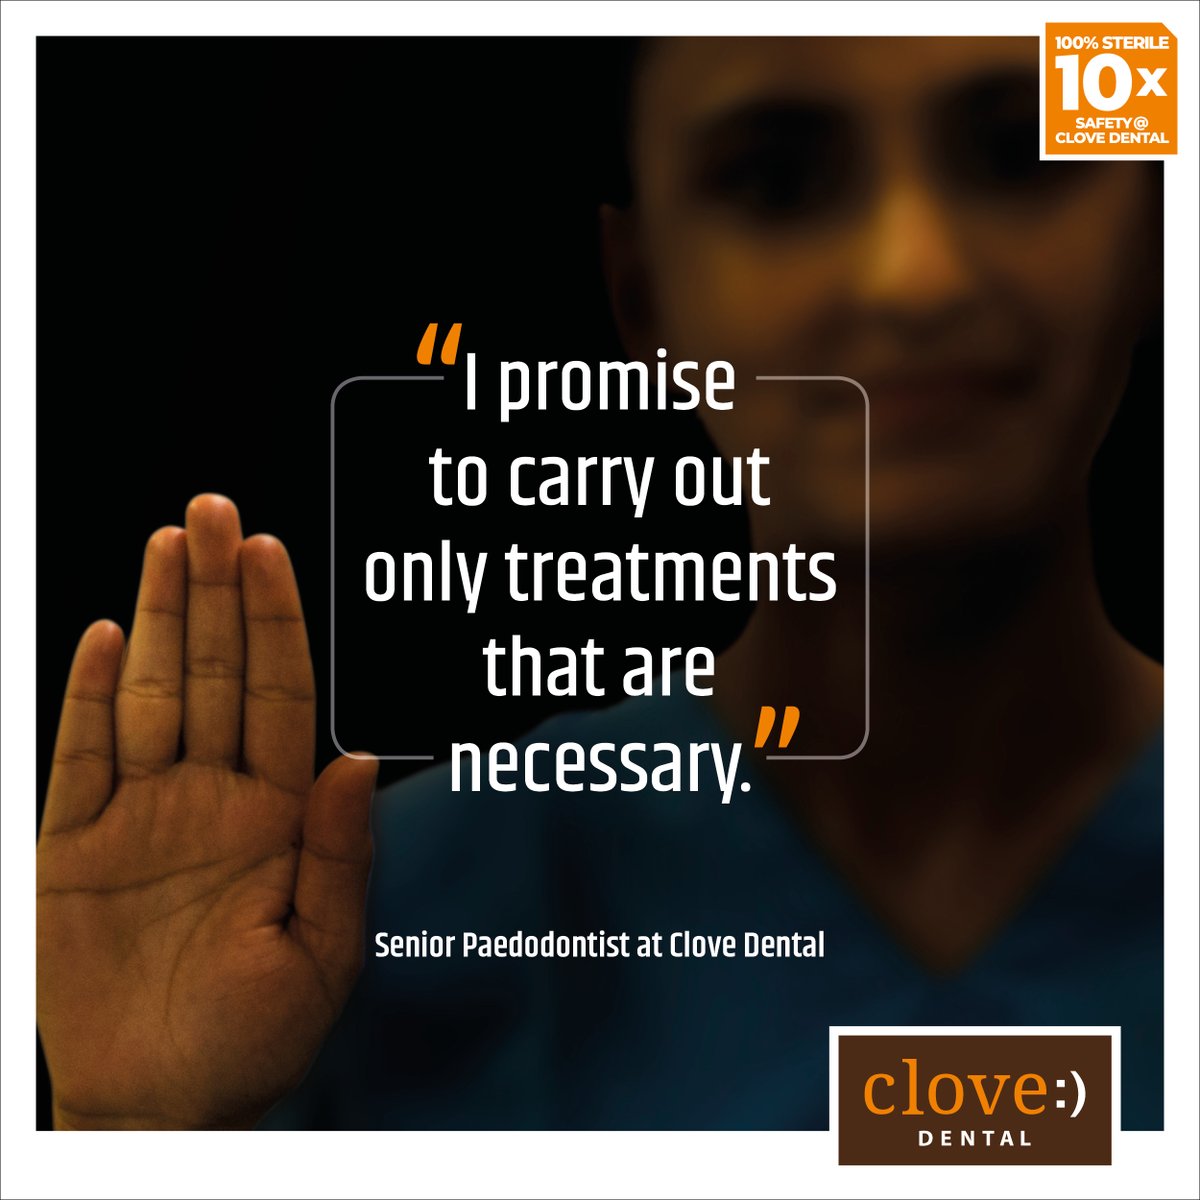 As a part of our #values & #ethics, we at @Clove_Dental have always kept the safety & protection of the people at our top priority. #CloveDental #WePromise #DoctorsDay2020